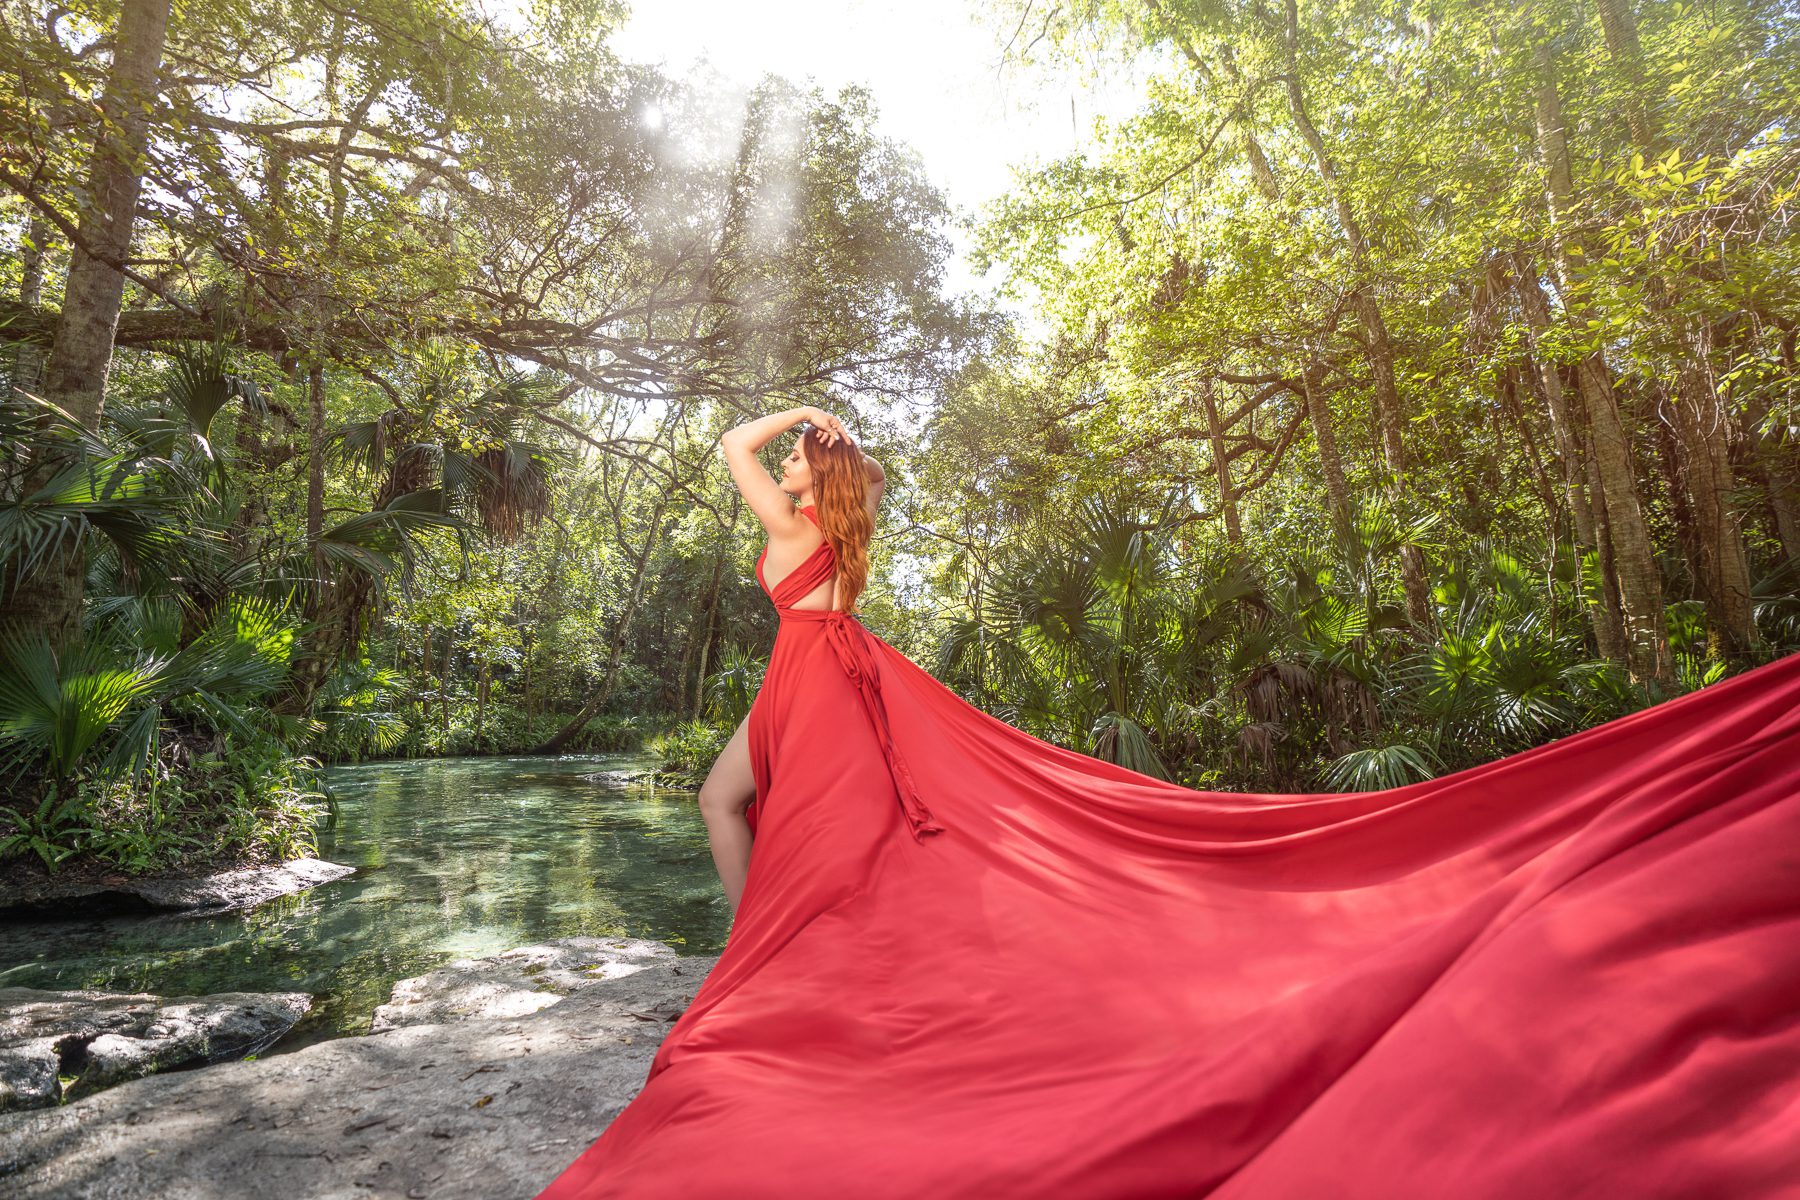 Women Empowerment Photoshoot at Rock Springs Florida in Red Flowy Dress